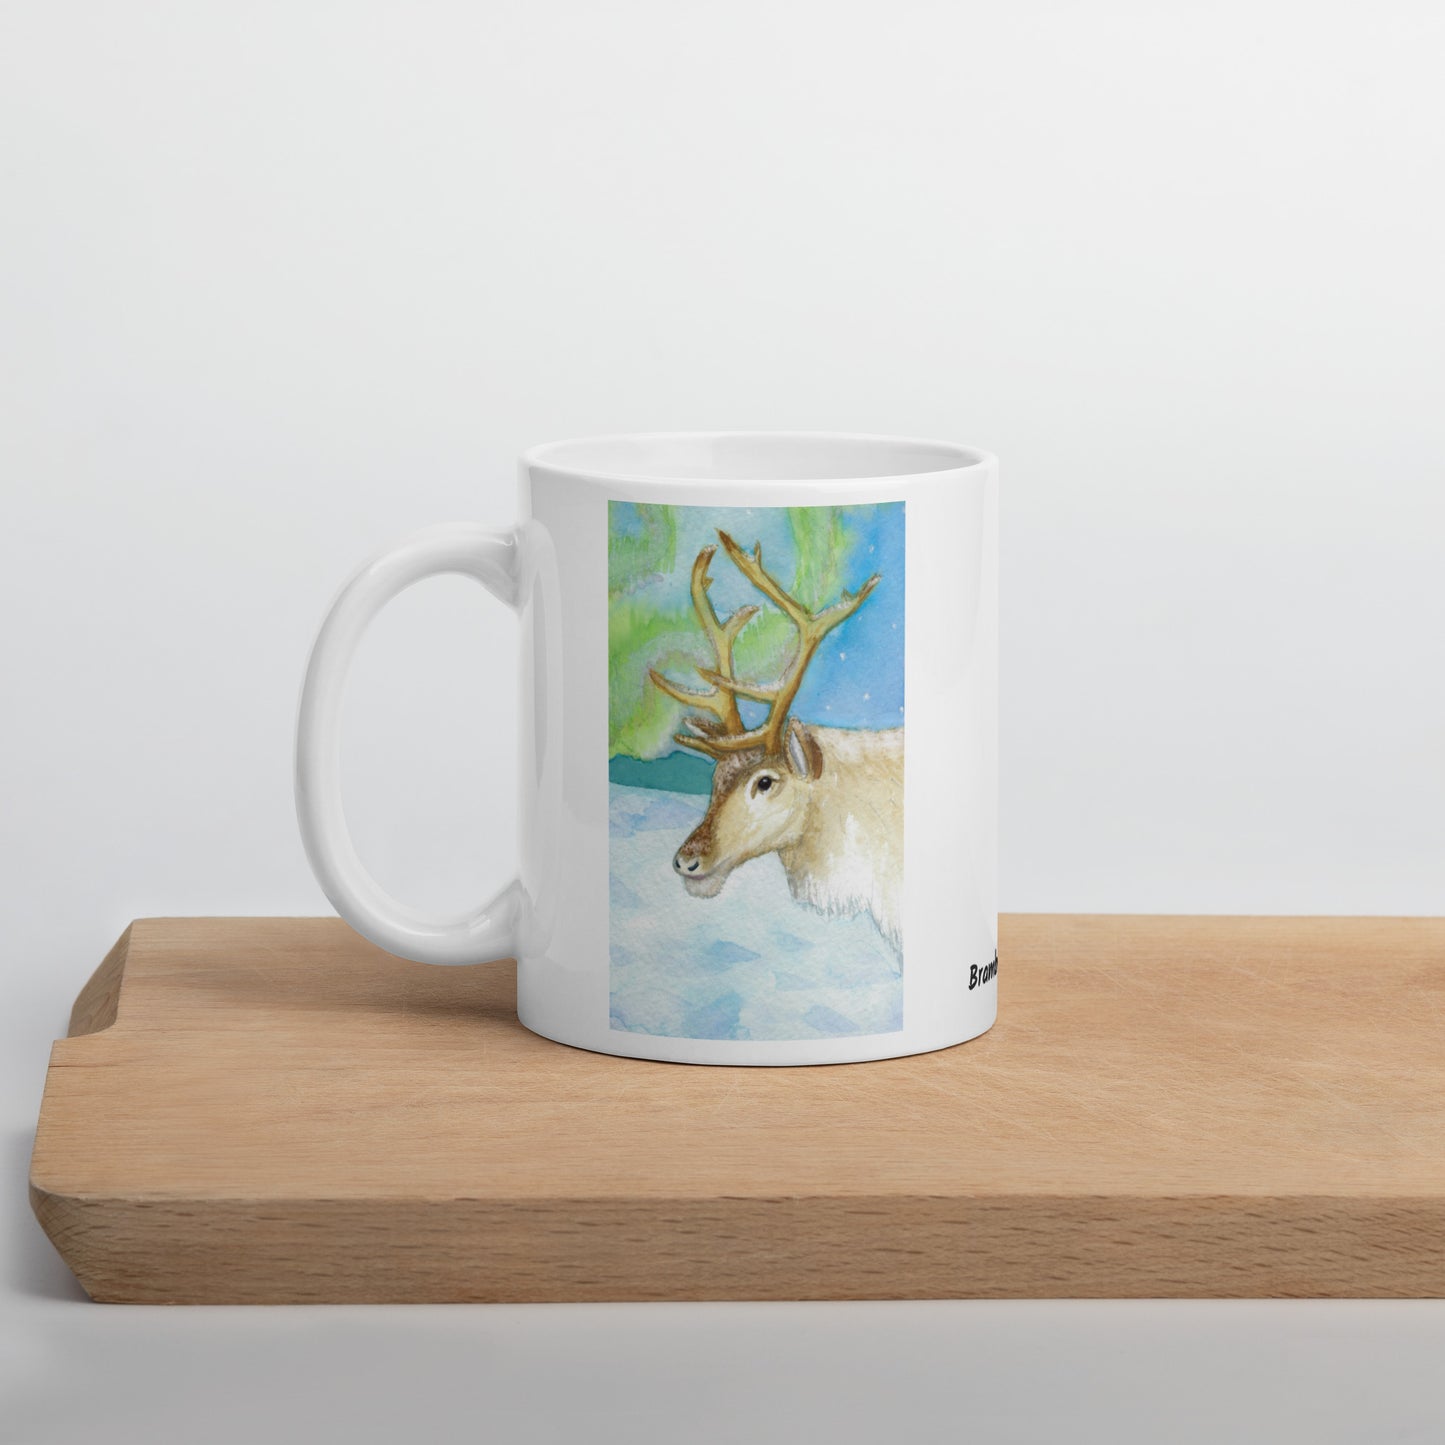 11 ounce ceramic mug featuring Northern Lights reindeer design. Double-sided print. Dishwasher and microwave safe. Shown on wooden cutting board.